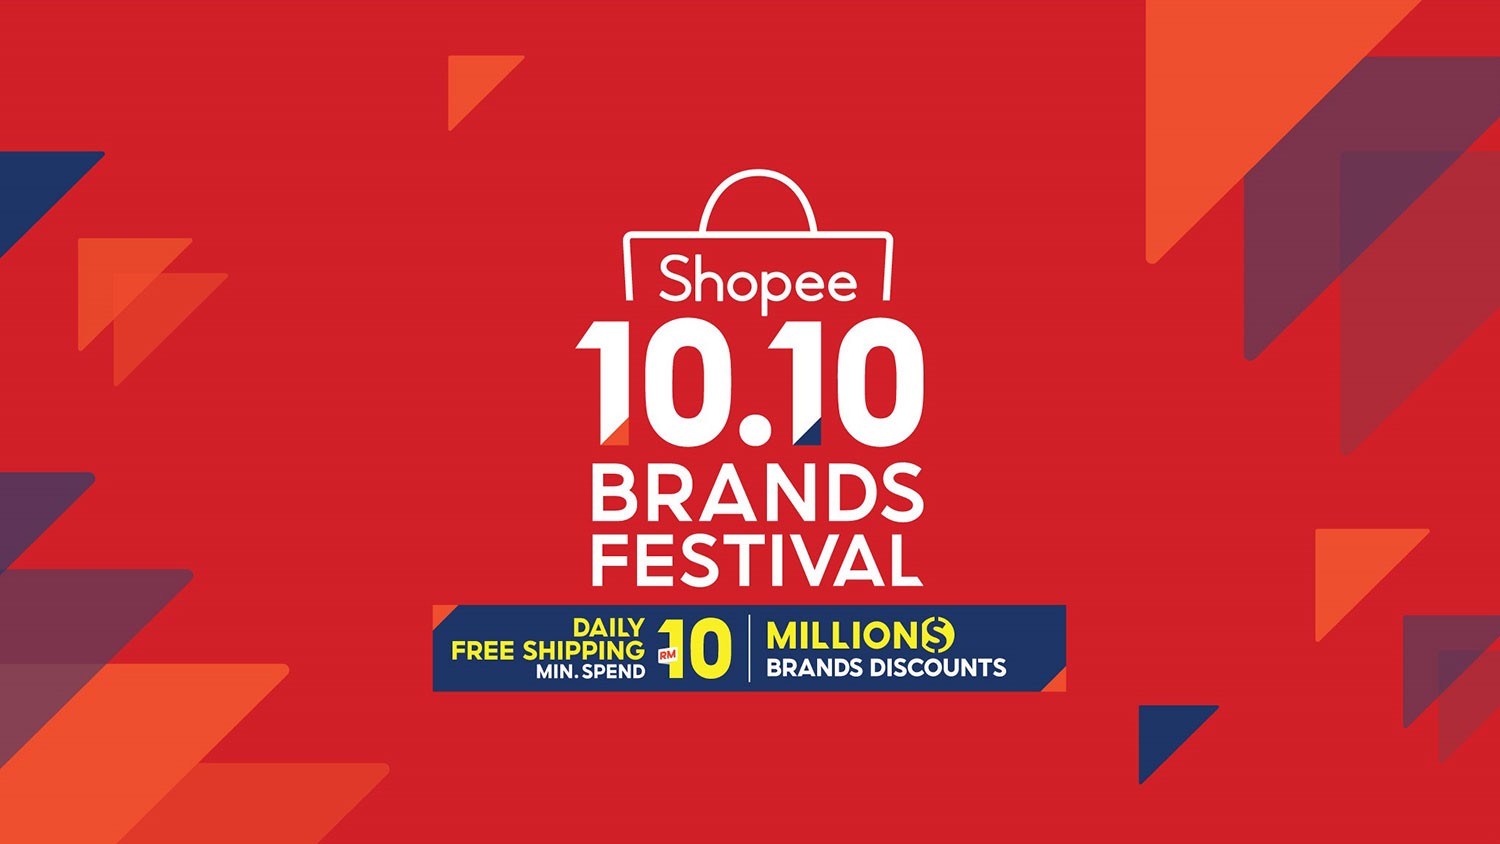 Shopee 10.10 Brands Festival Offers up to 85% Off